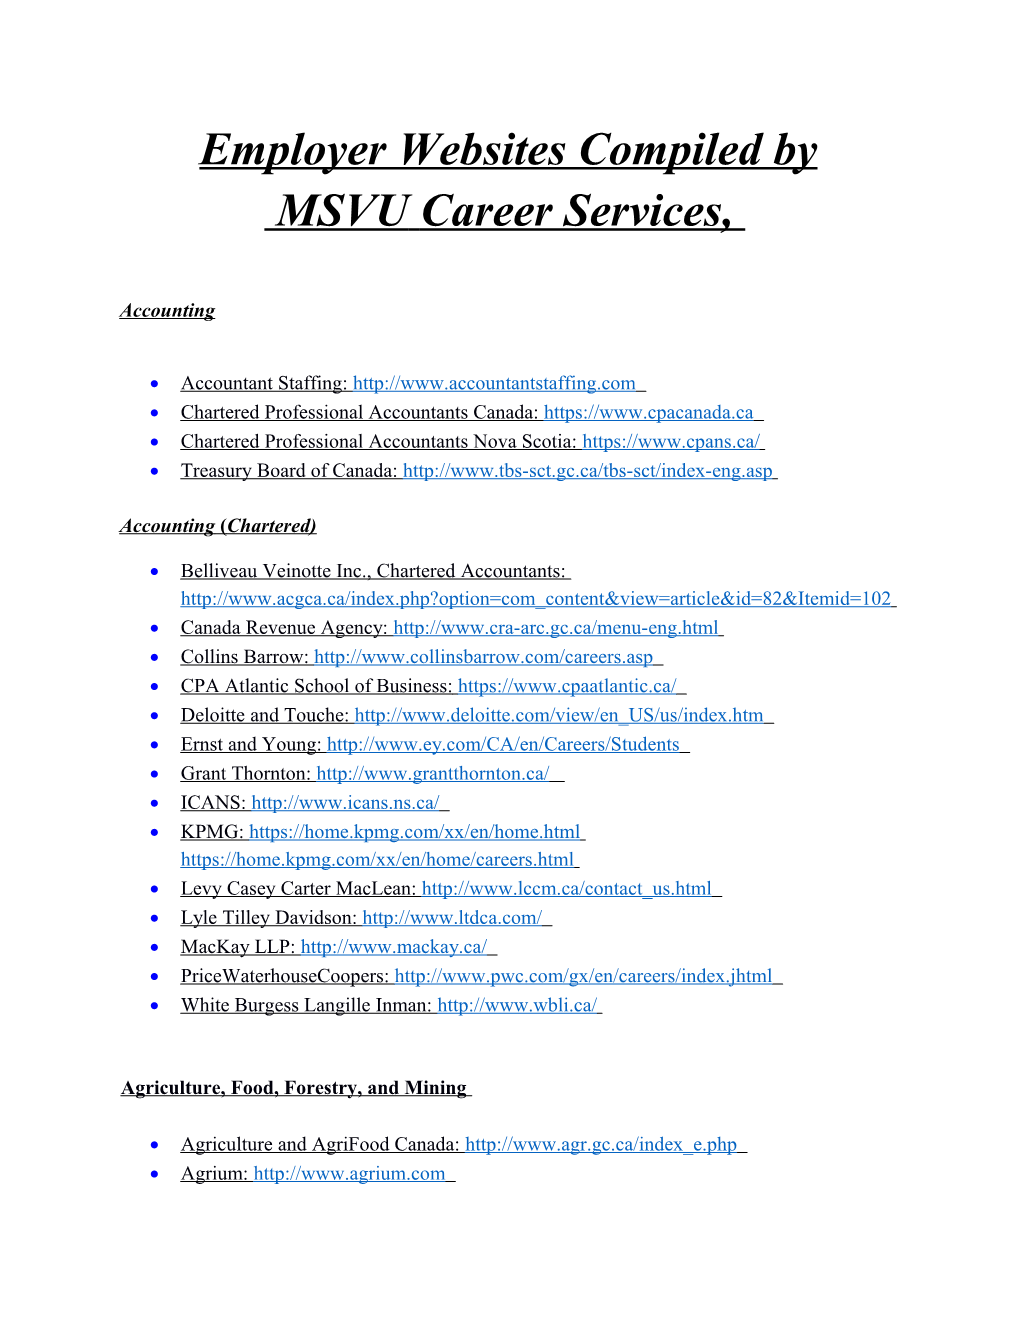 Employer Websites Compiled By